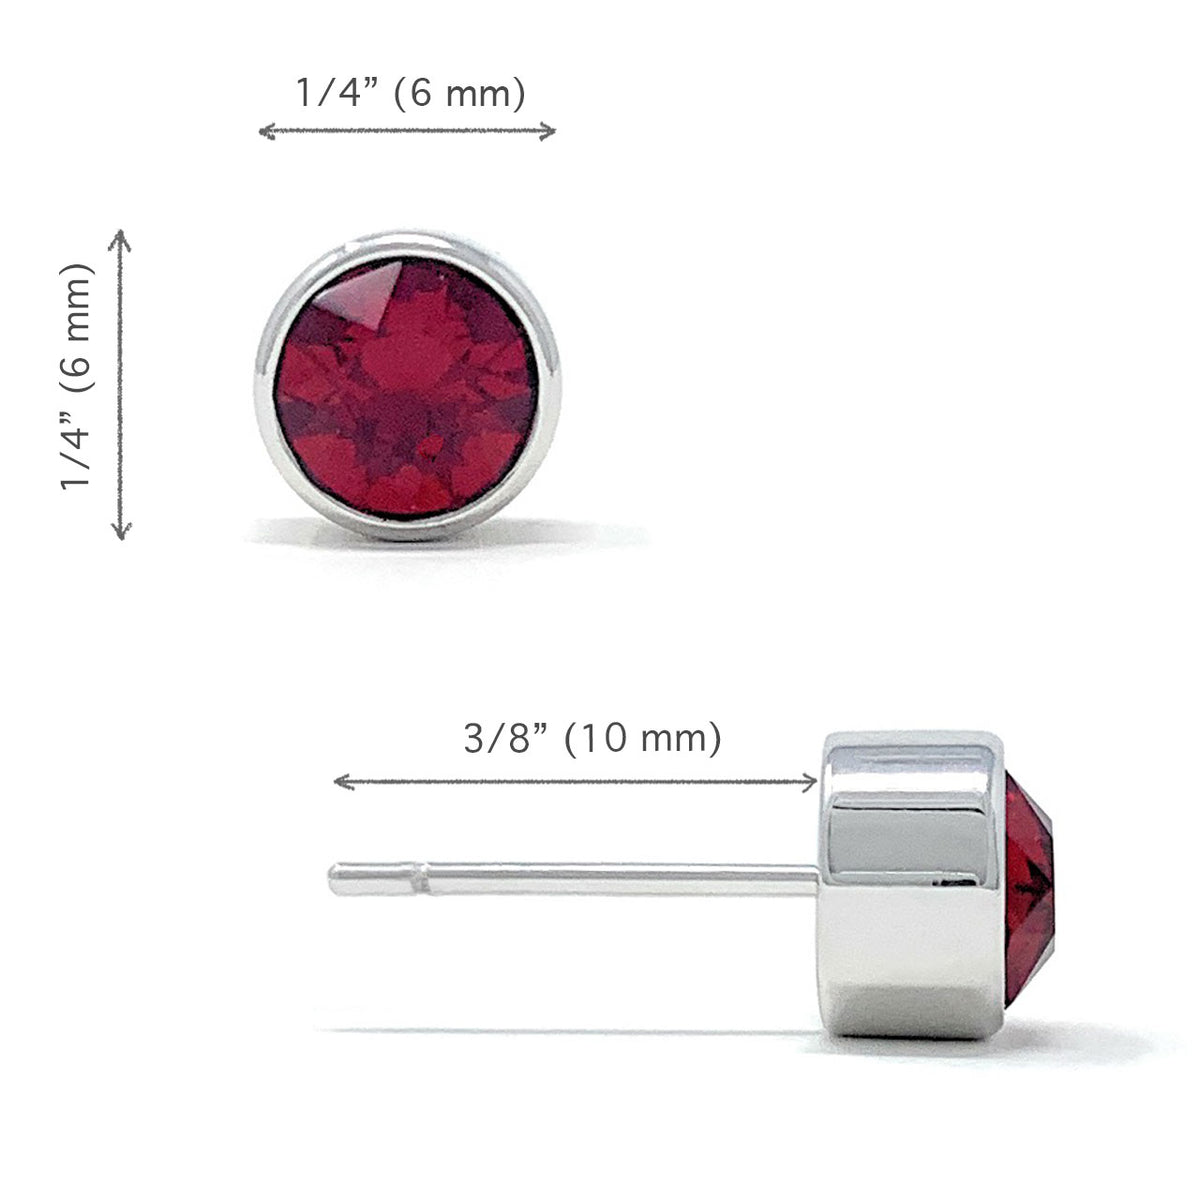 Harley Small Stud Earrings with Red Siam Round Crystals from Swarovski Silver Toned Rhodium Plated - Ed Heart